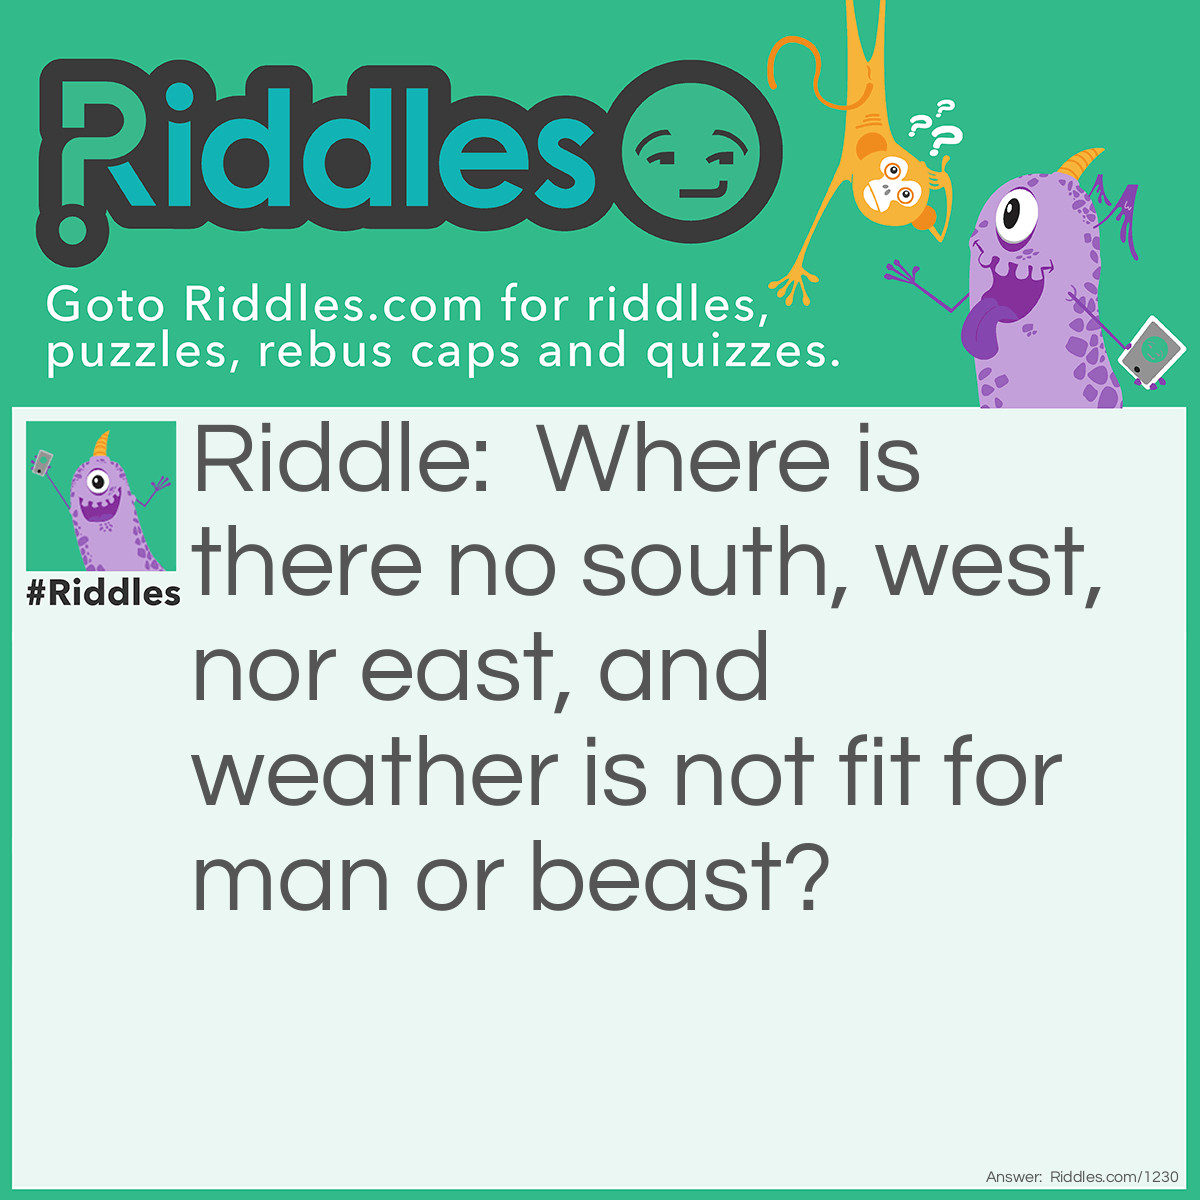 Riddle: Where is there no south, west, nor east, and weather is not fit for man or beast? Answer: The South Pole.